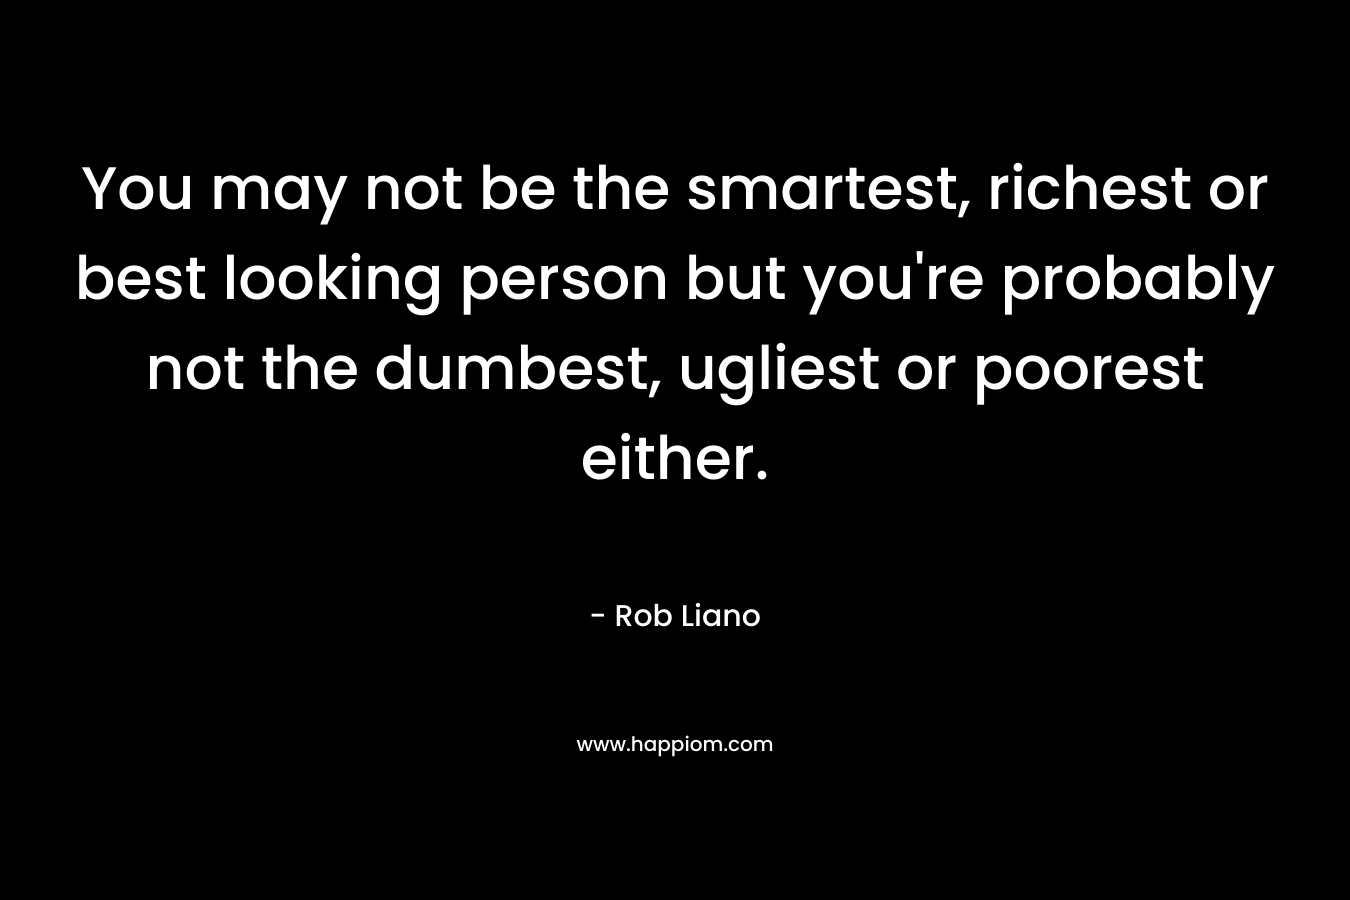 You may not be the smartest, richest or best looking person but you're probably not the dumbest, ugliest or poorest either.